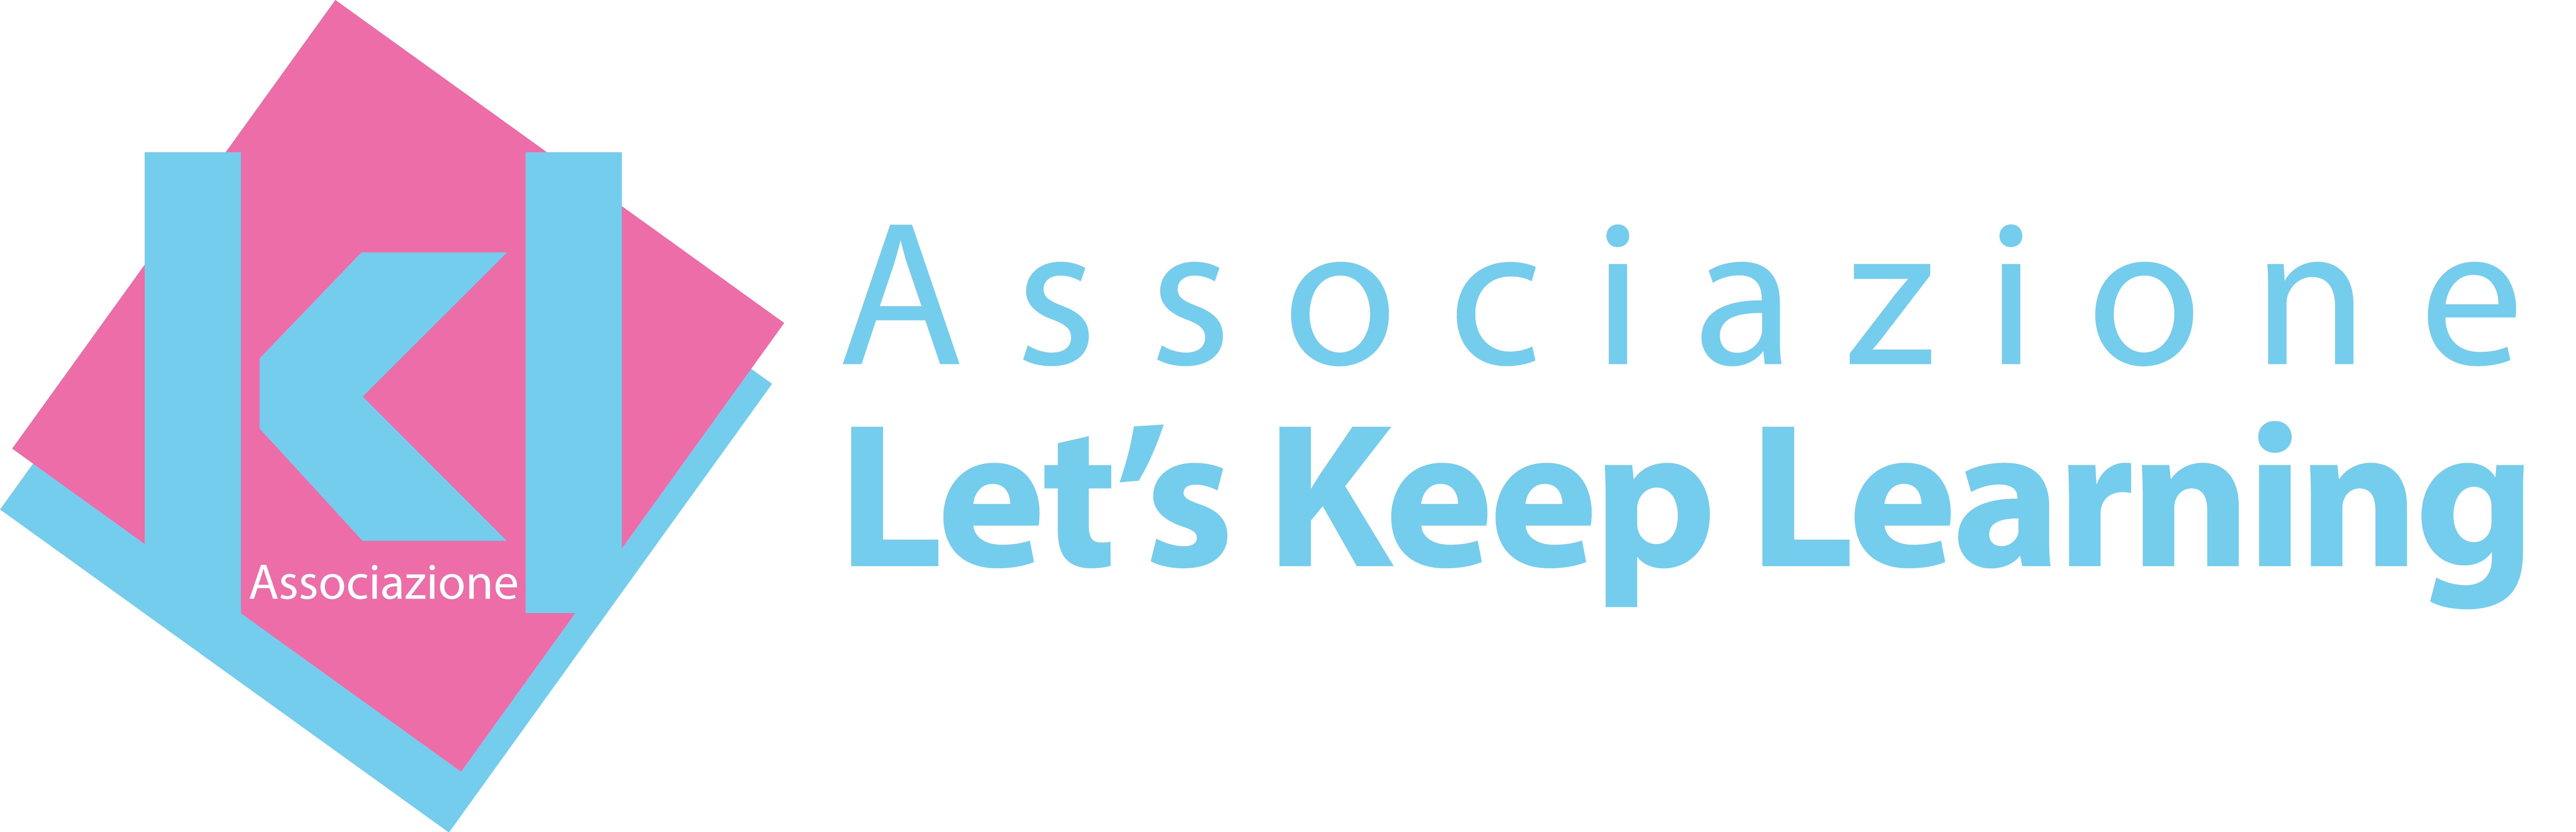 Associazione LKL - "Let's Keep Learning"